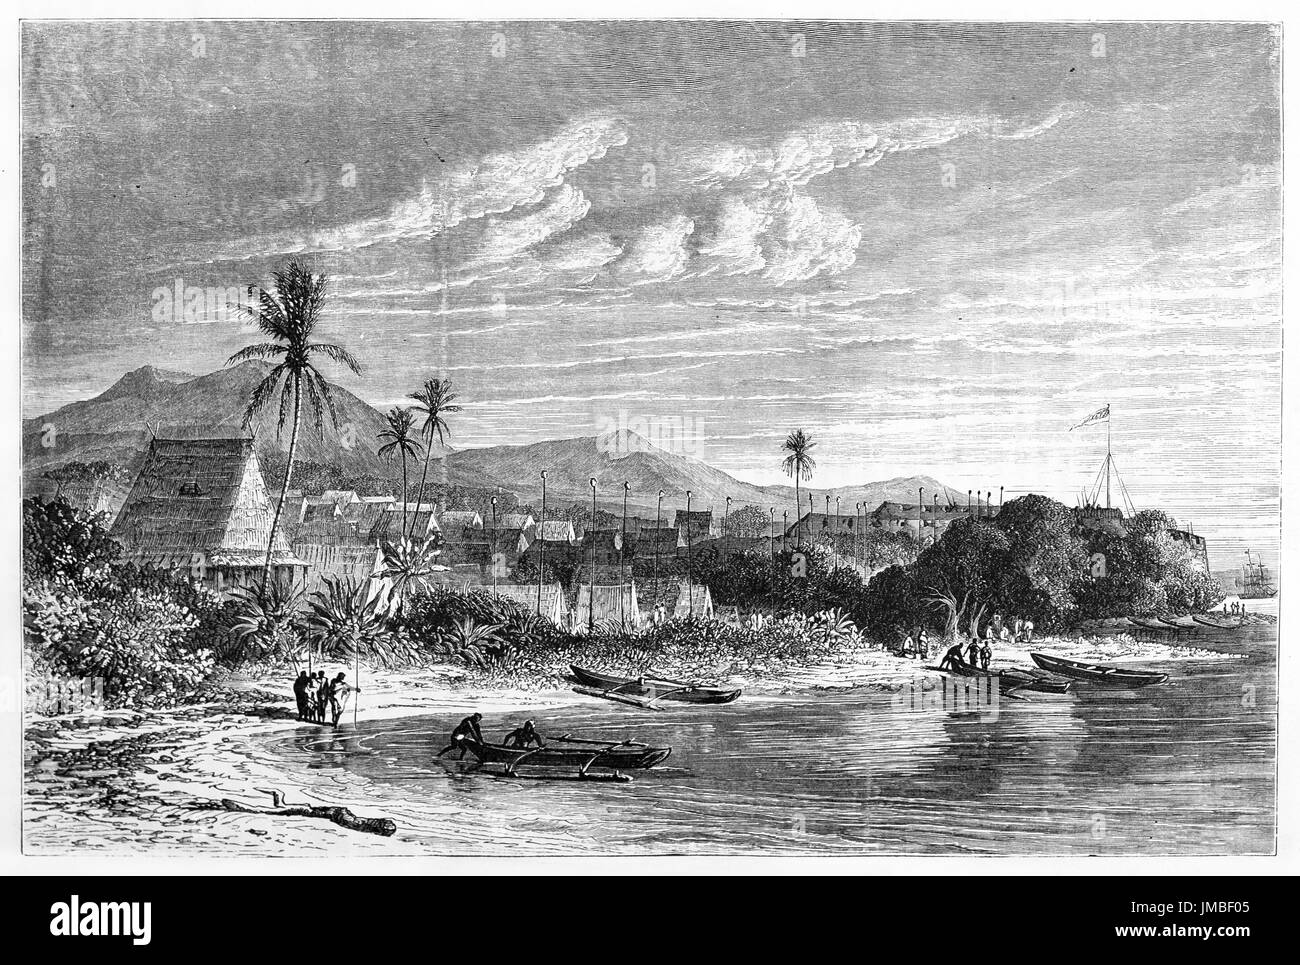 calm sunset and sea on african shore where is Toamasina, chief seaport in Madagascar. Ancient grey tone etching style art by Bérard, 1861. Stock Photo